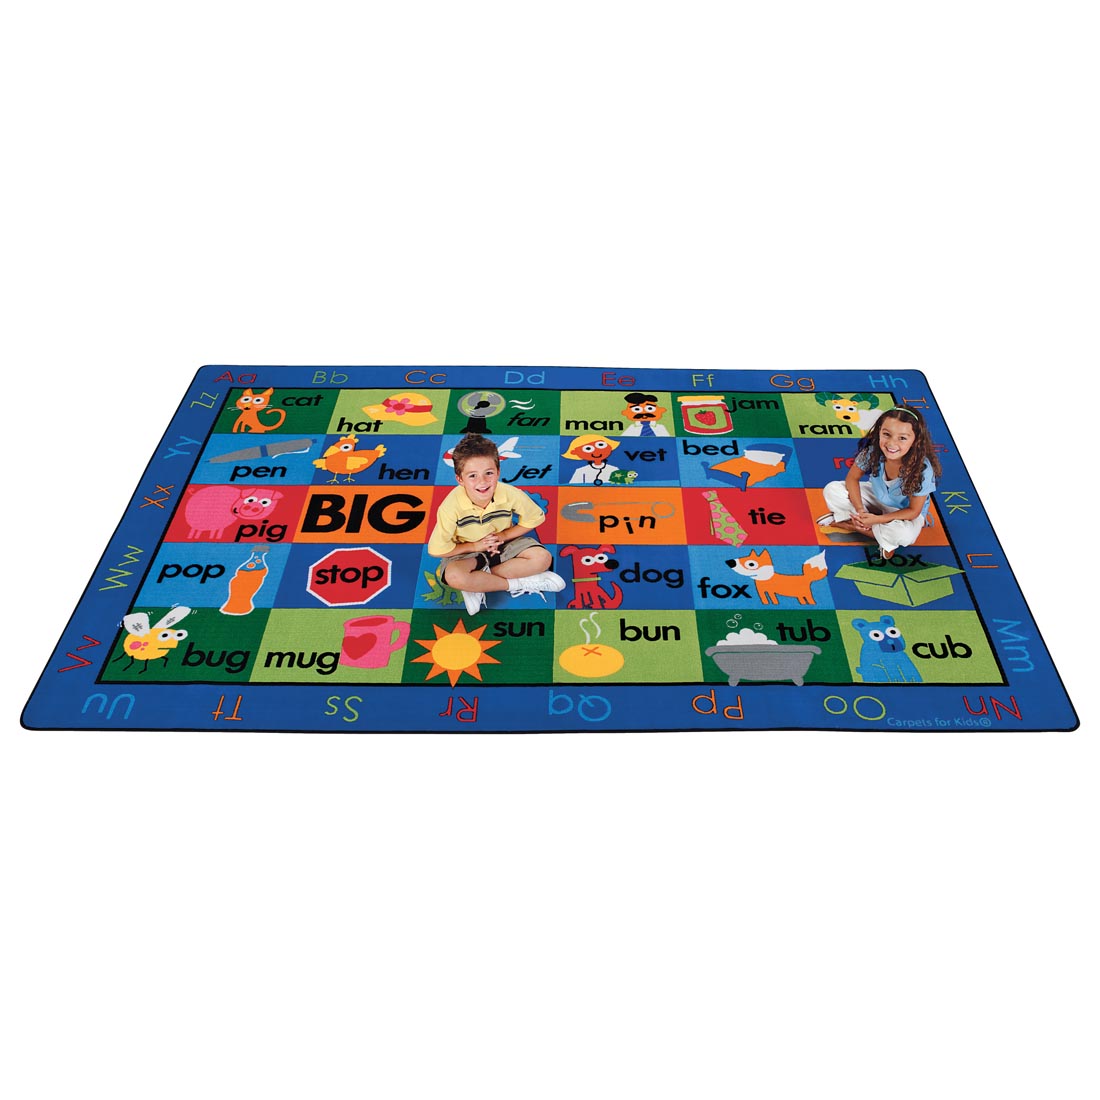 Children sitting on the Rhyme Time Rug by Carpets For Kids